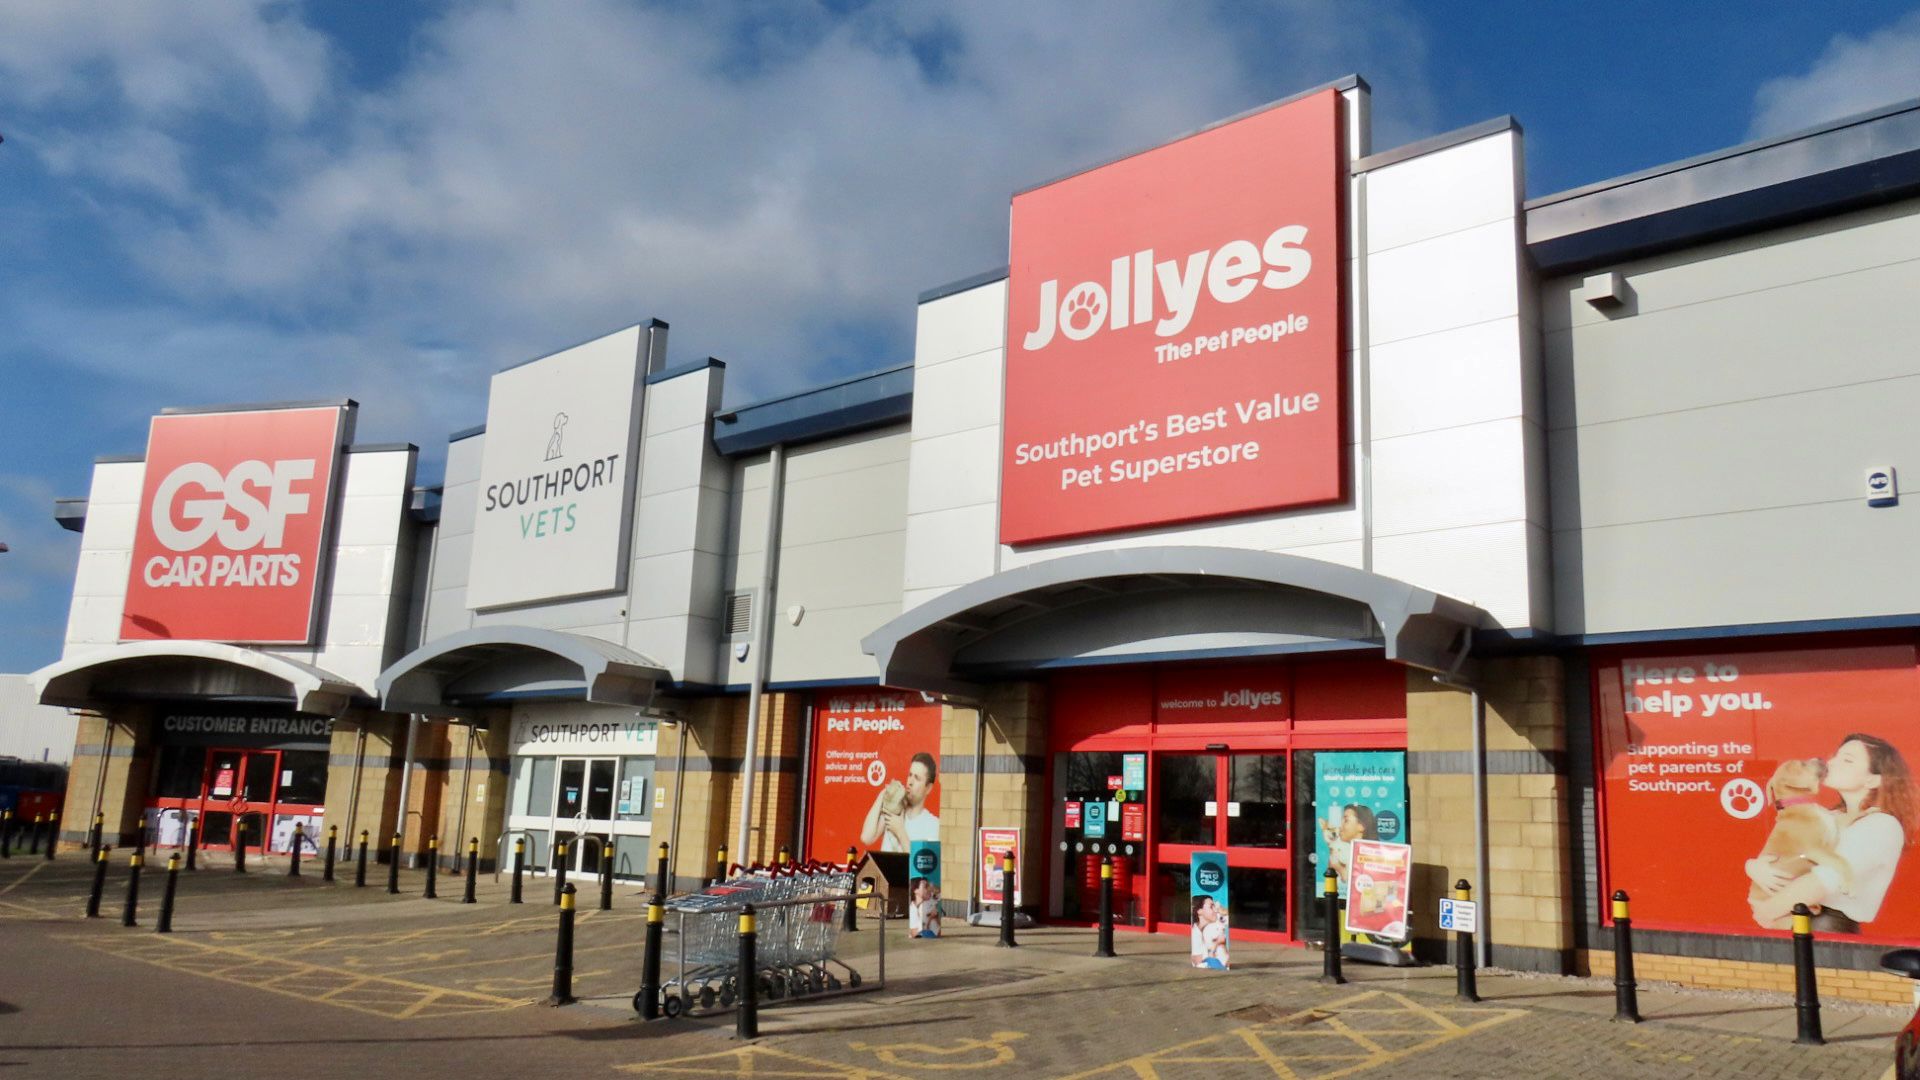 The Jollyes - The Pet People store at Kew Retail Park in Southport. Photo by Andrew Brown Arena PR